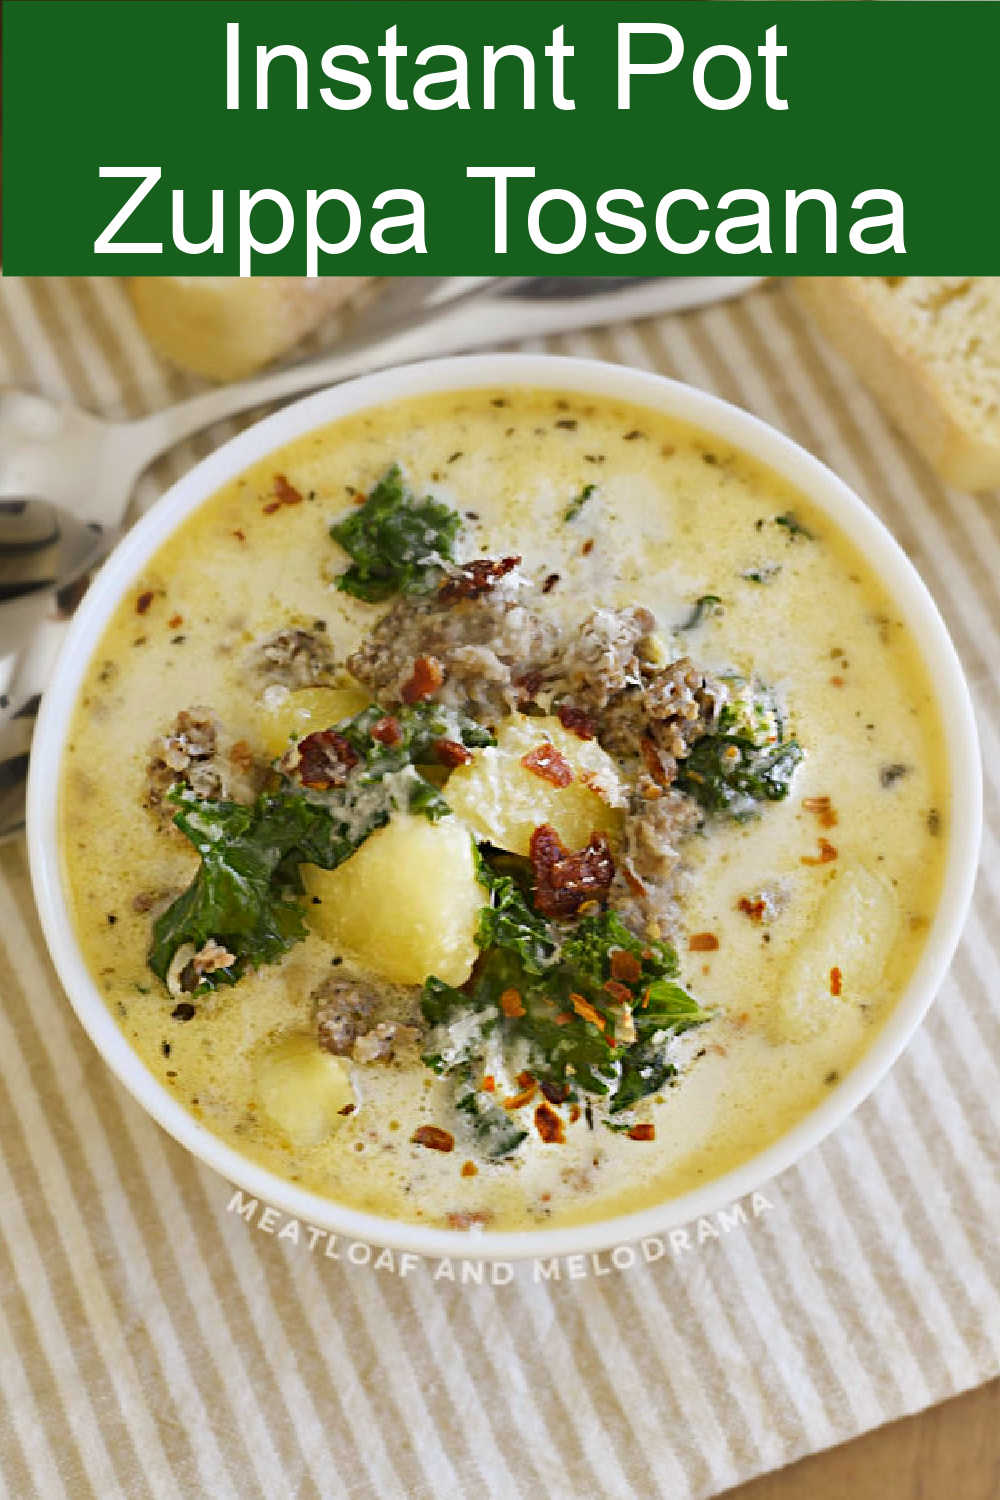 Instant Pot Zuppa Toscana is a creamy Tuscan sausage potato soup recipe that's easy to make. This Olive Garden copycat is comfort food and one of the best soups you'll ever eat! via @meamel